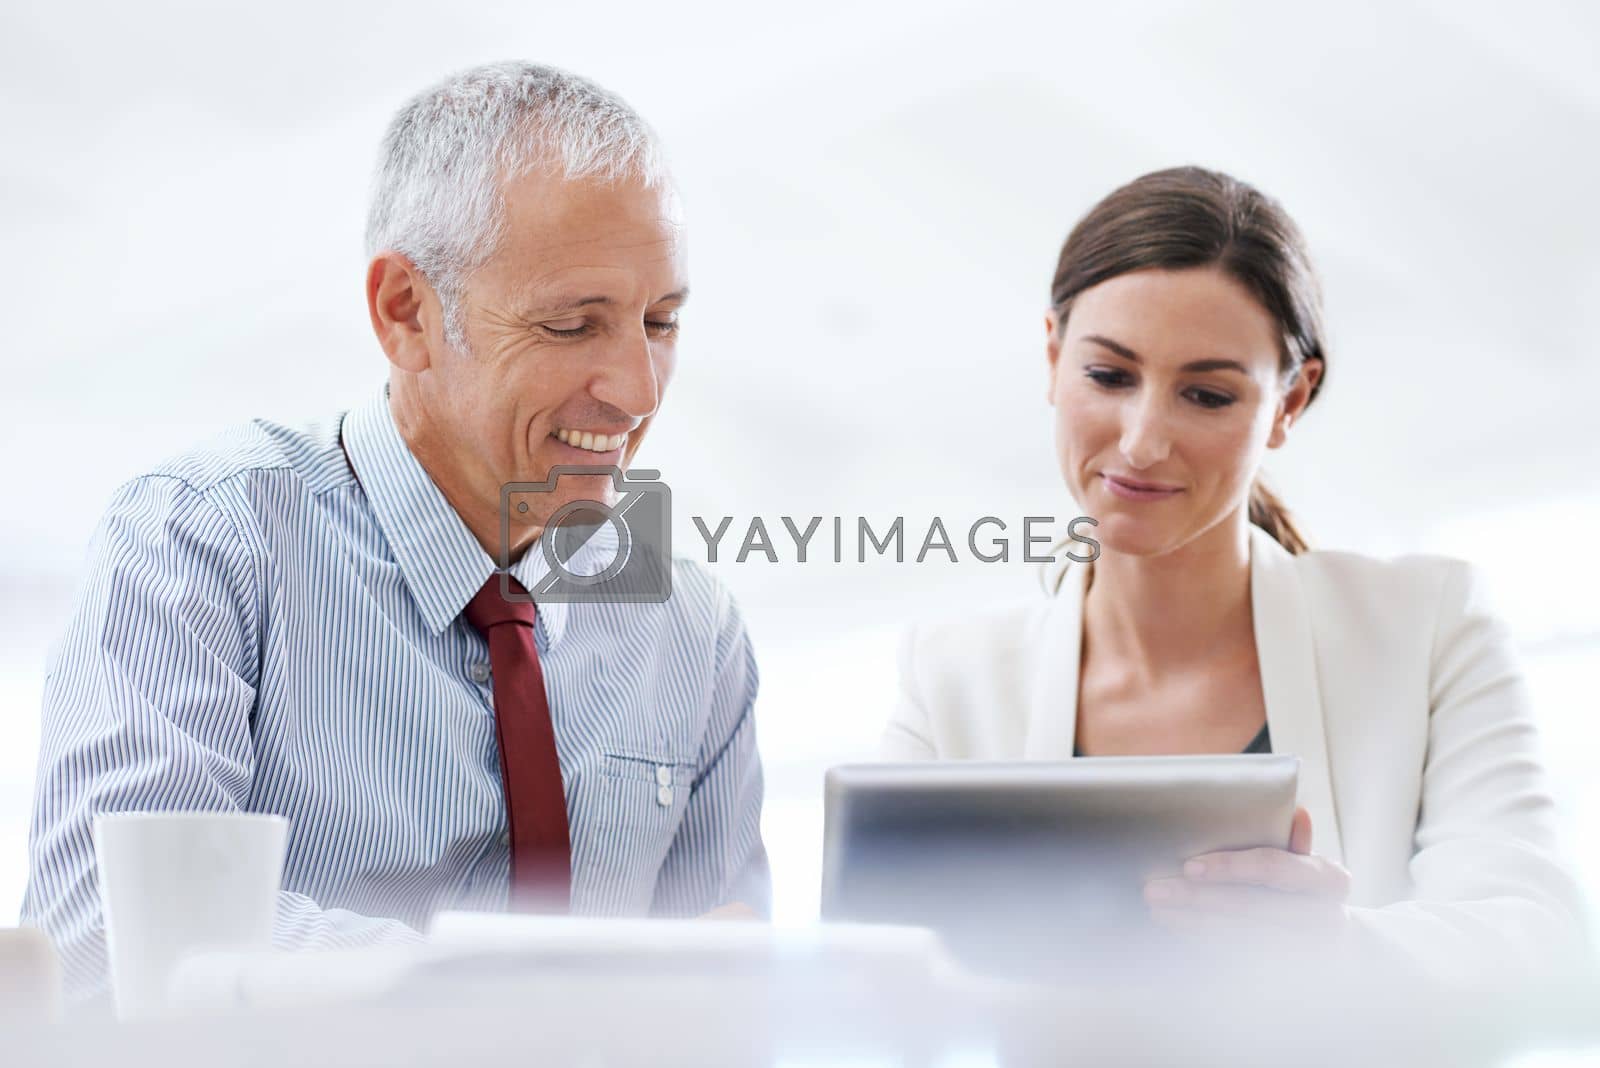 Royalty free image of Technology supporting business processes. two coworkers using a digital tablet at work. by YuriArcurs